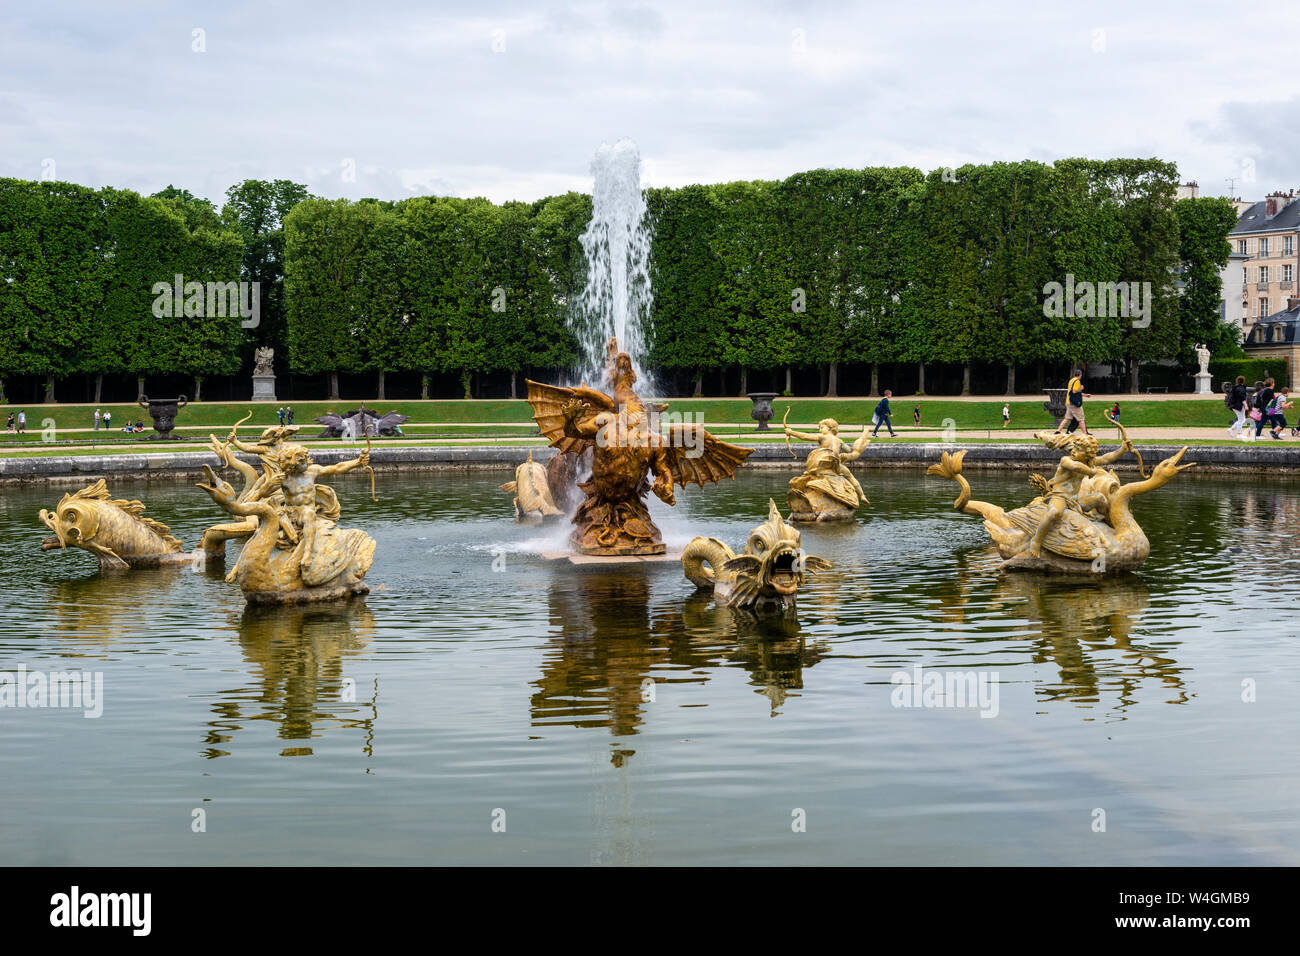 The Dragon Fountain - Palace of Versailles Gardens, Yvelines, Île-de-France region of France Stock Photo